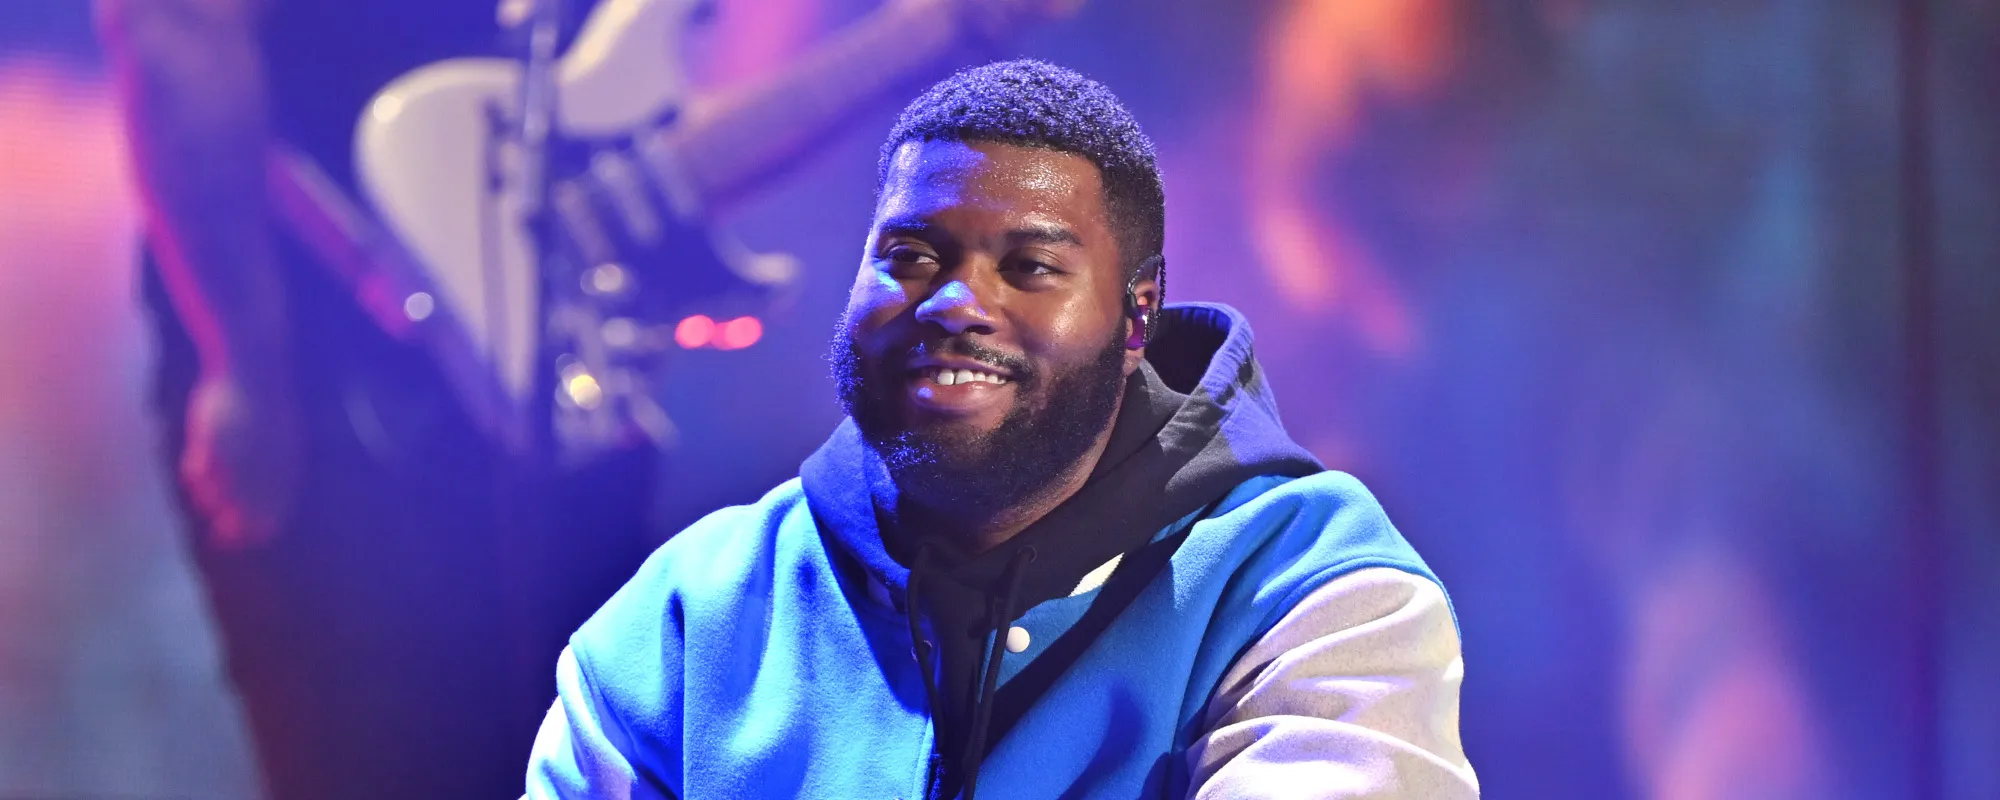 5 Songs You Didn’t Know Khalid Wrote for Other Artists